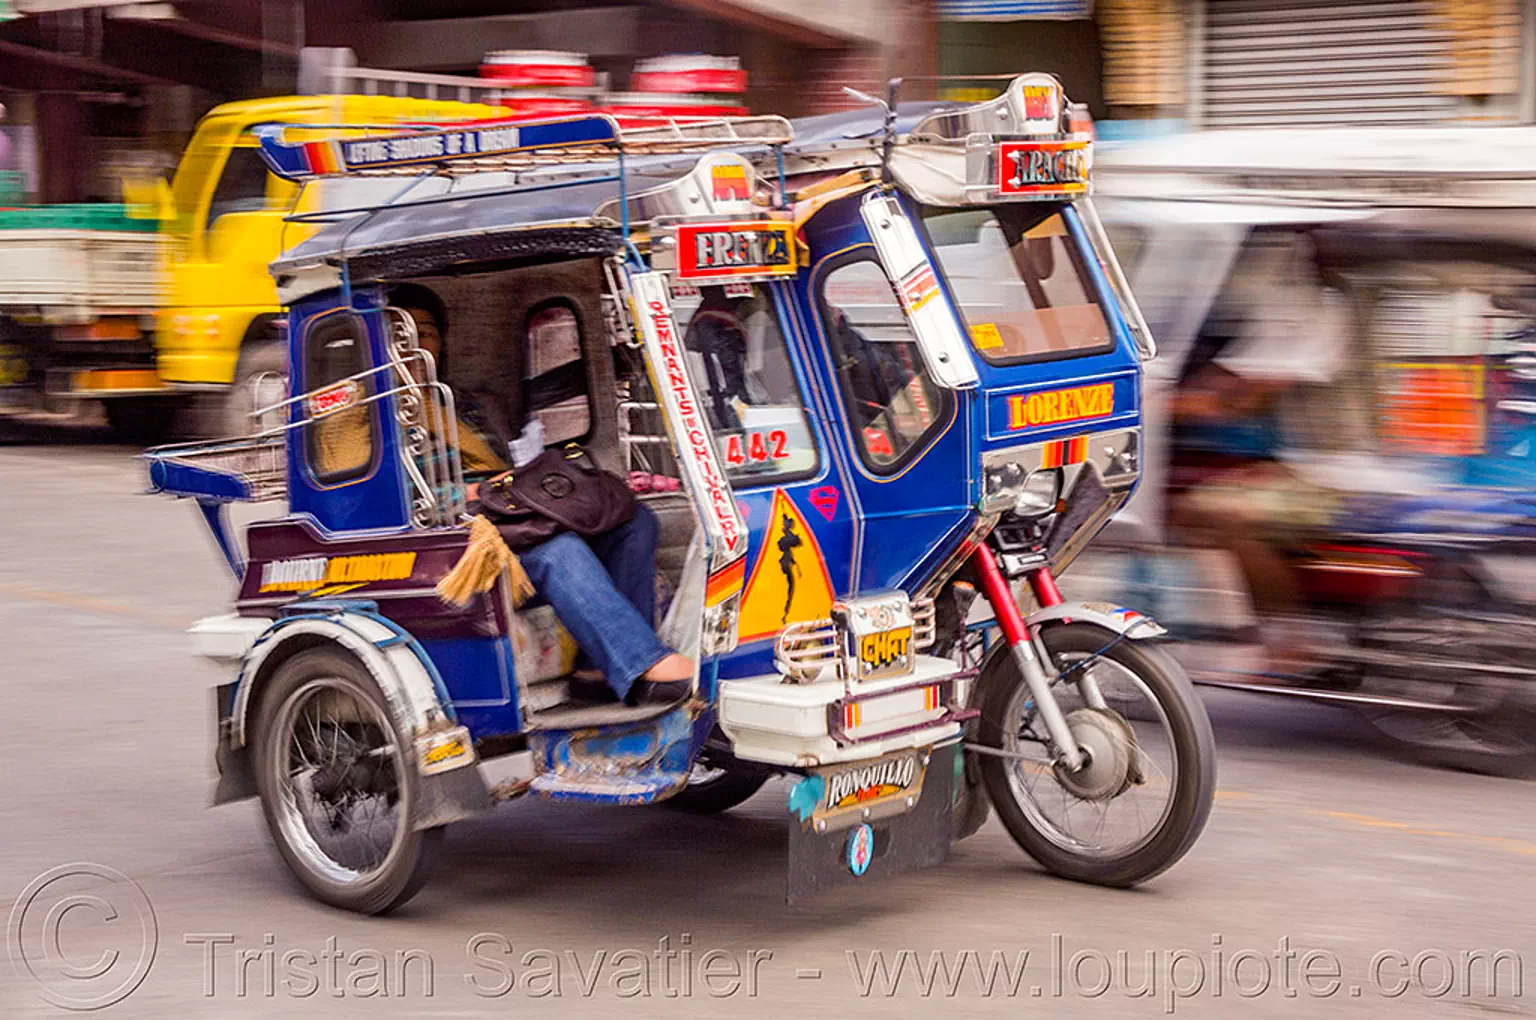 motorized tricycles (philippines), bontoc, colorful, motorcycles, motorized tricycle, passenger, philippines, sidecar, sitting, woman